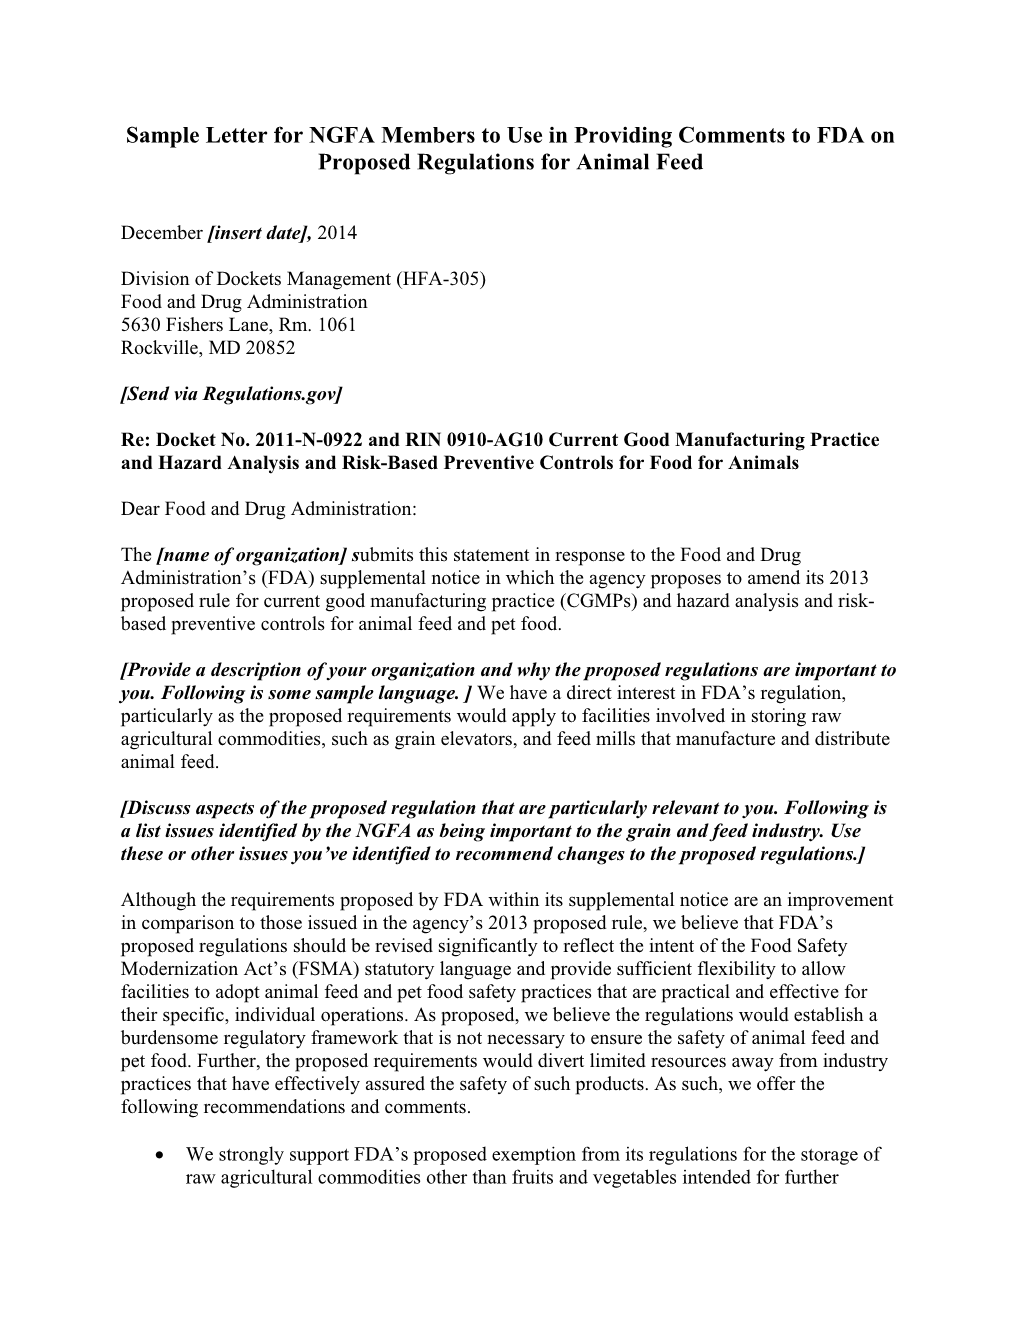 Sample Letter for NGFA Membersto Use in Providing Comments to FDA on Proposed Regulations